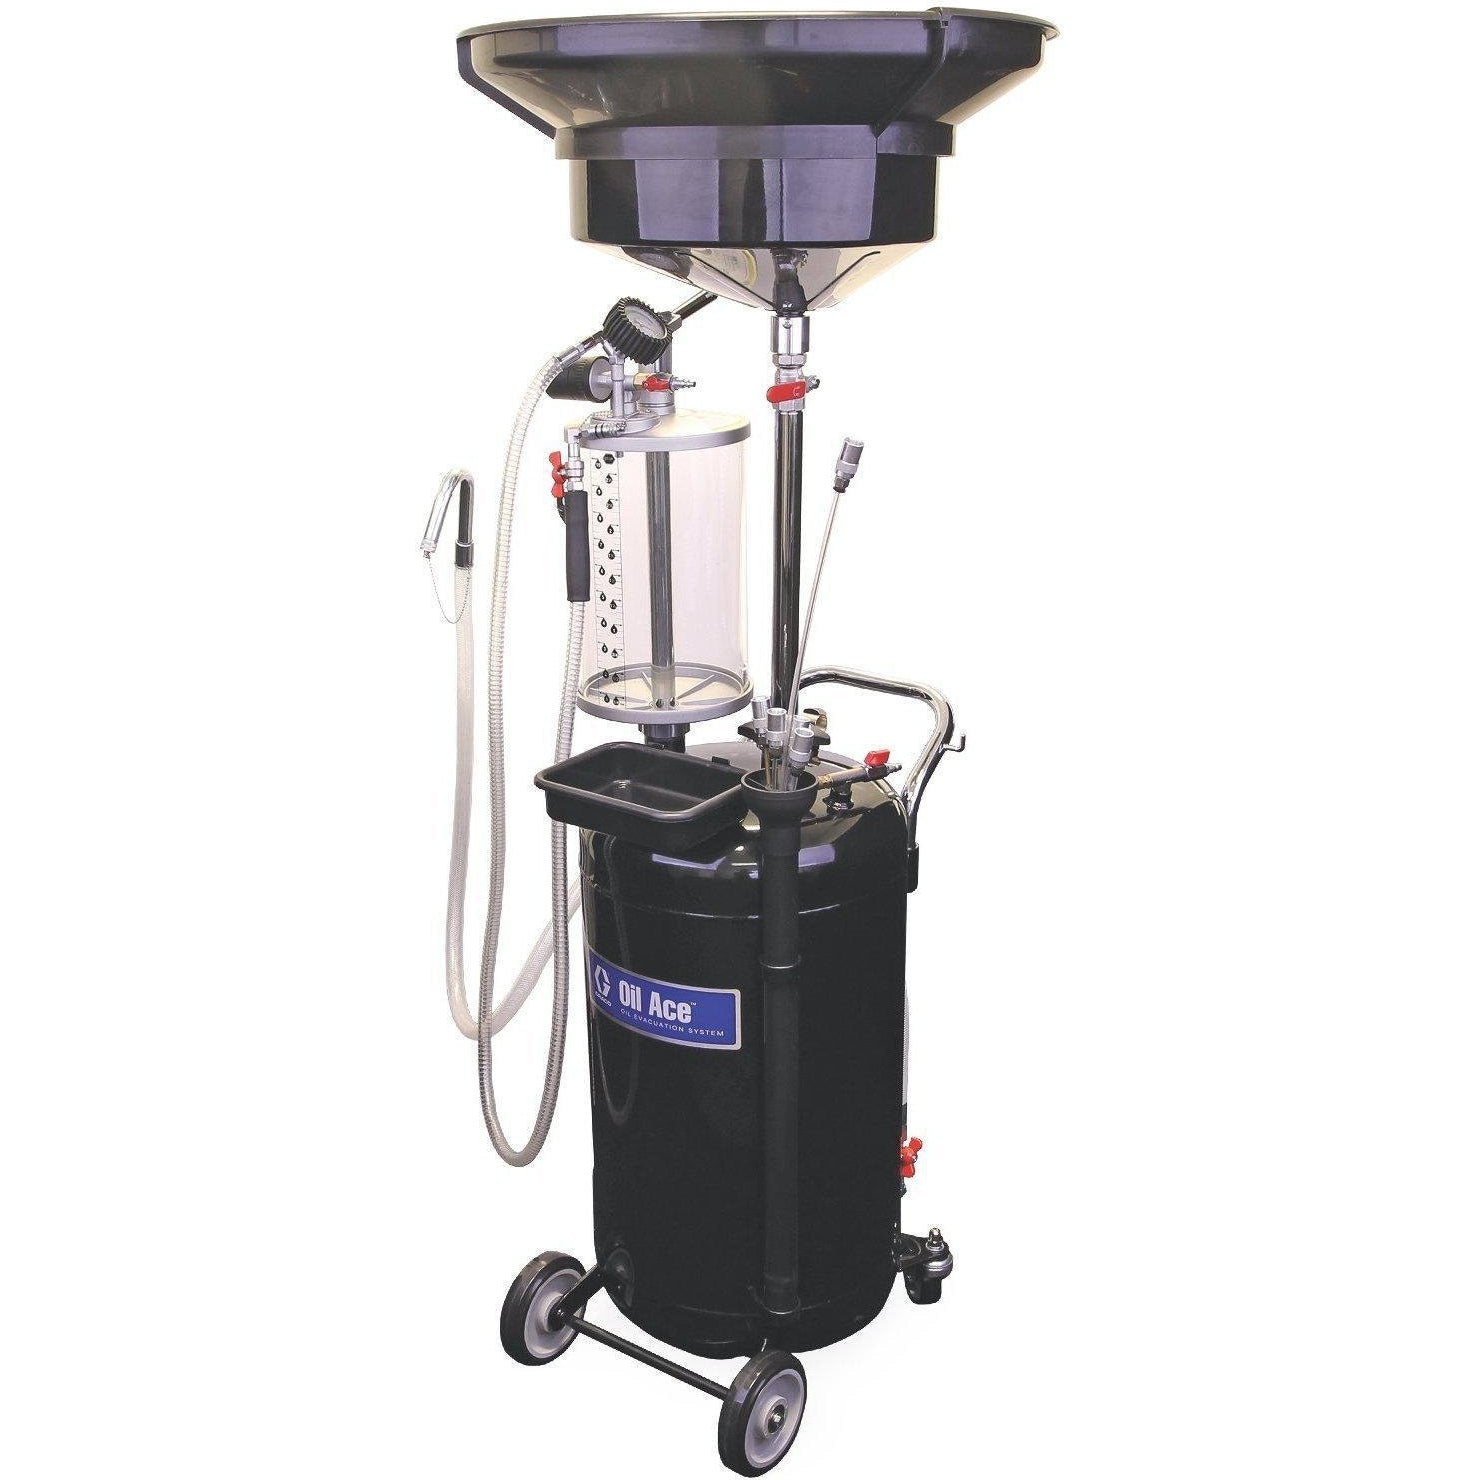 26C064-Graco 26C064 Waste Oil Evacuation System With 24 Gal (90 L) Steel Tank, Suction Probes, Sight Glass, Oil Drain Funnel And Adapters-Order-Online-Fireball-Equipment